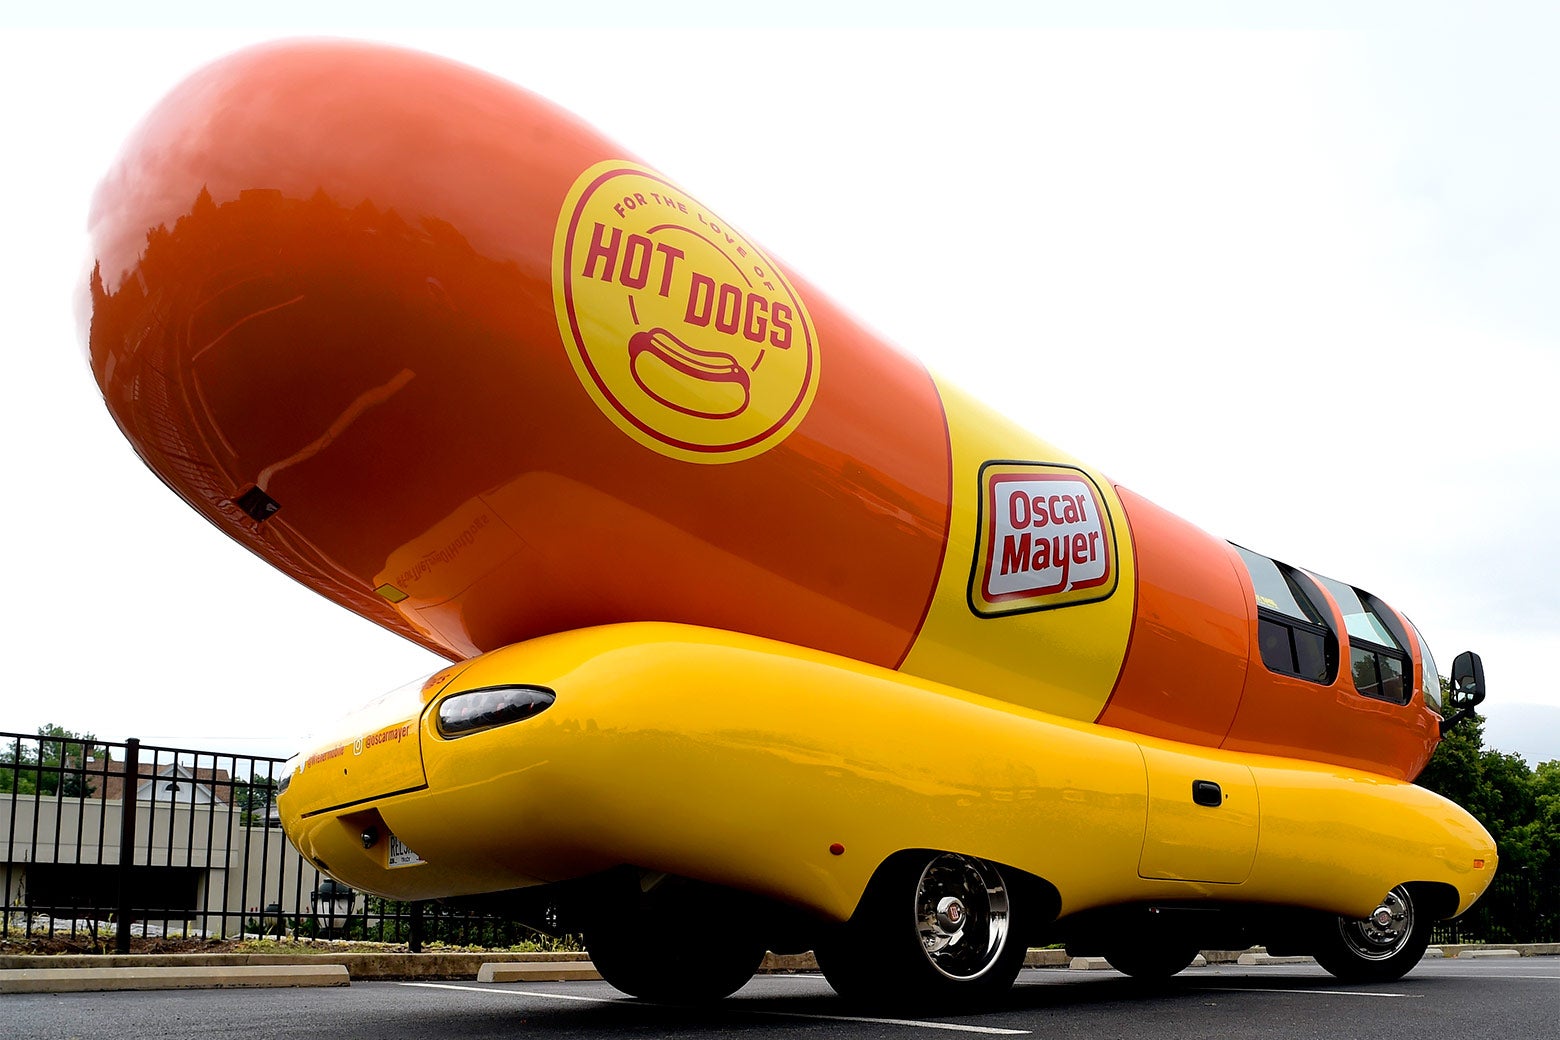 Oscar Mayer Wienermobile drivers: Yes, they're having sex with each other.